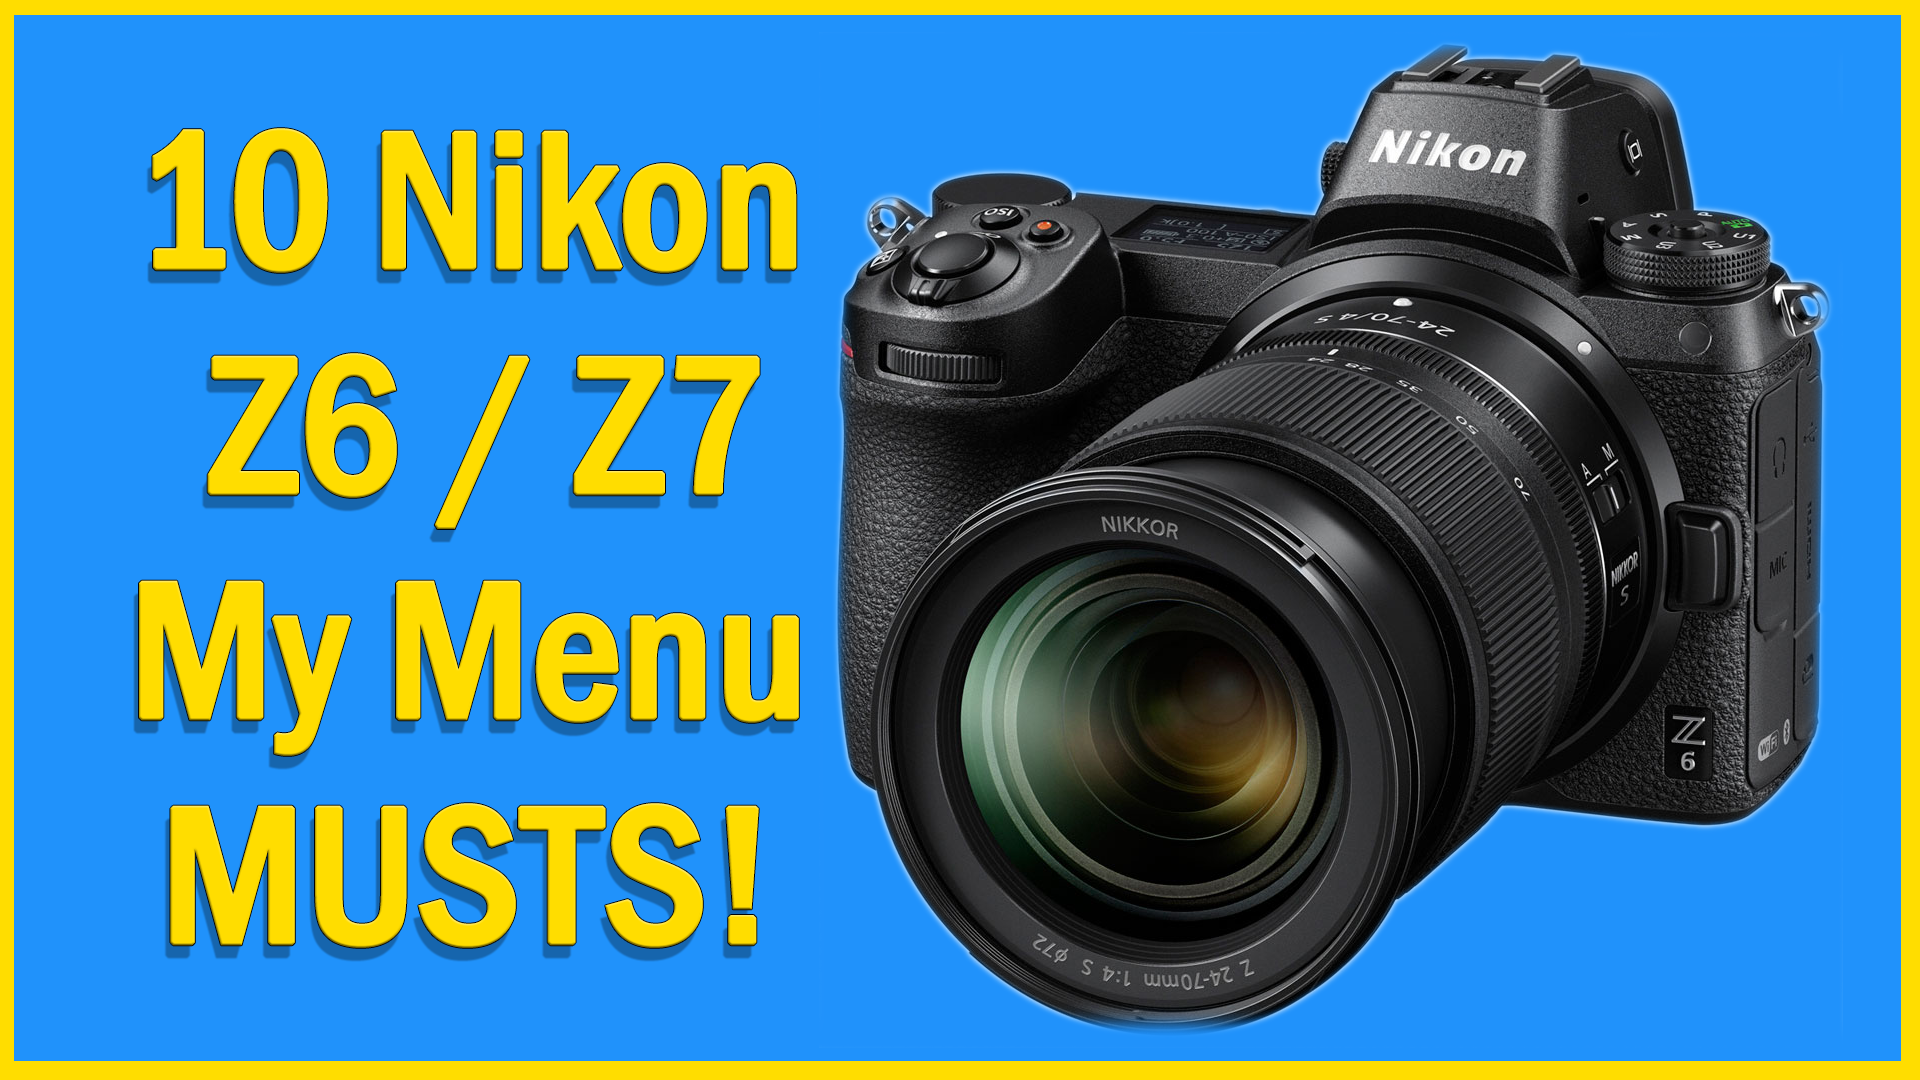 10 MUST HAVE My Menu Settings for the Nikon Z6 / Z7